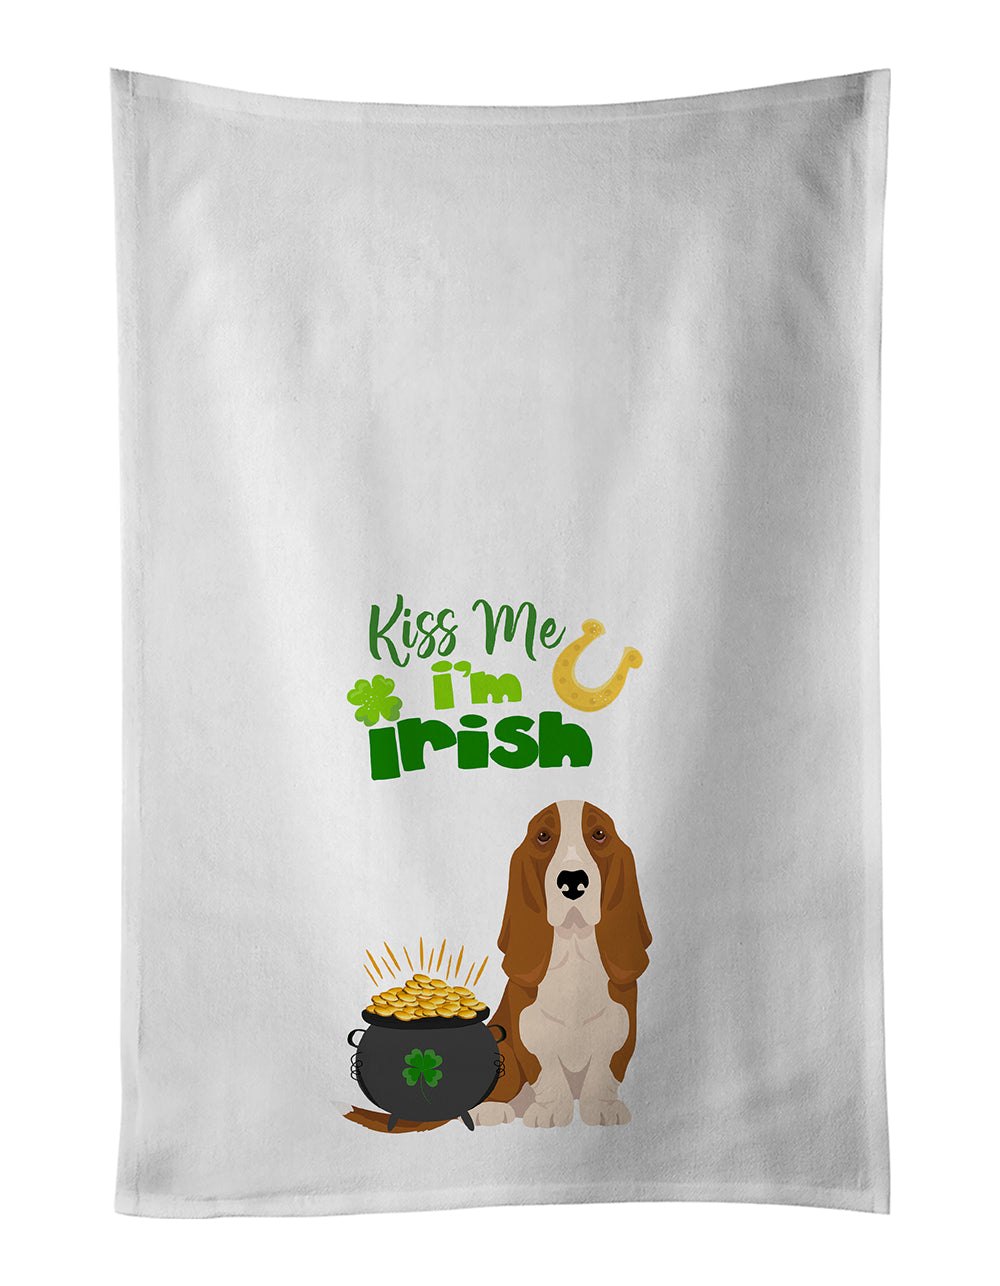 Buy this Red and White Tricolor Basset Hound St. Patrick's Day White Kitchen Towel Set of 2 Dish Towels